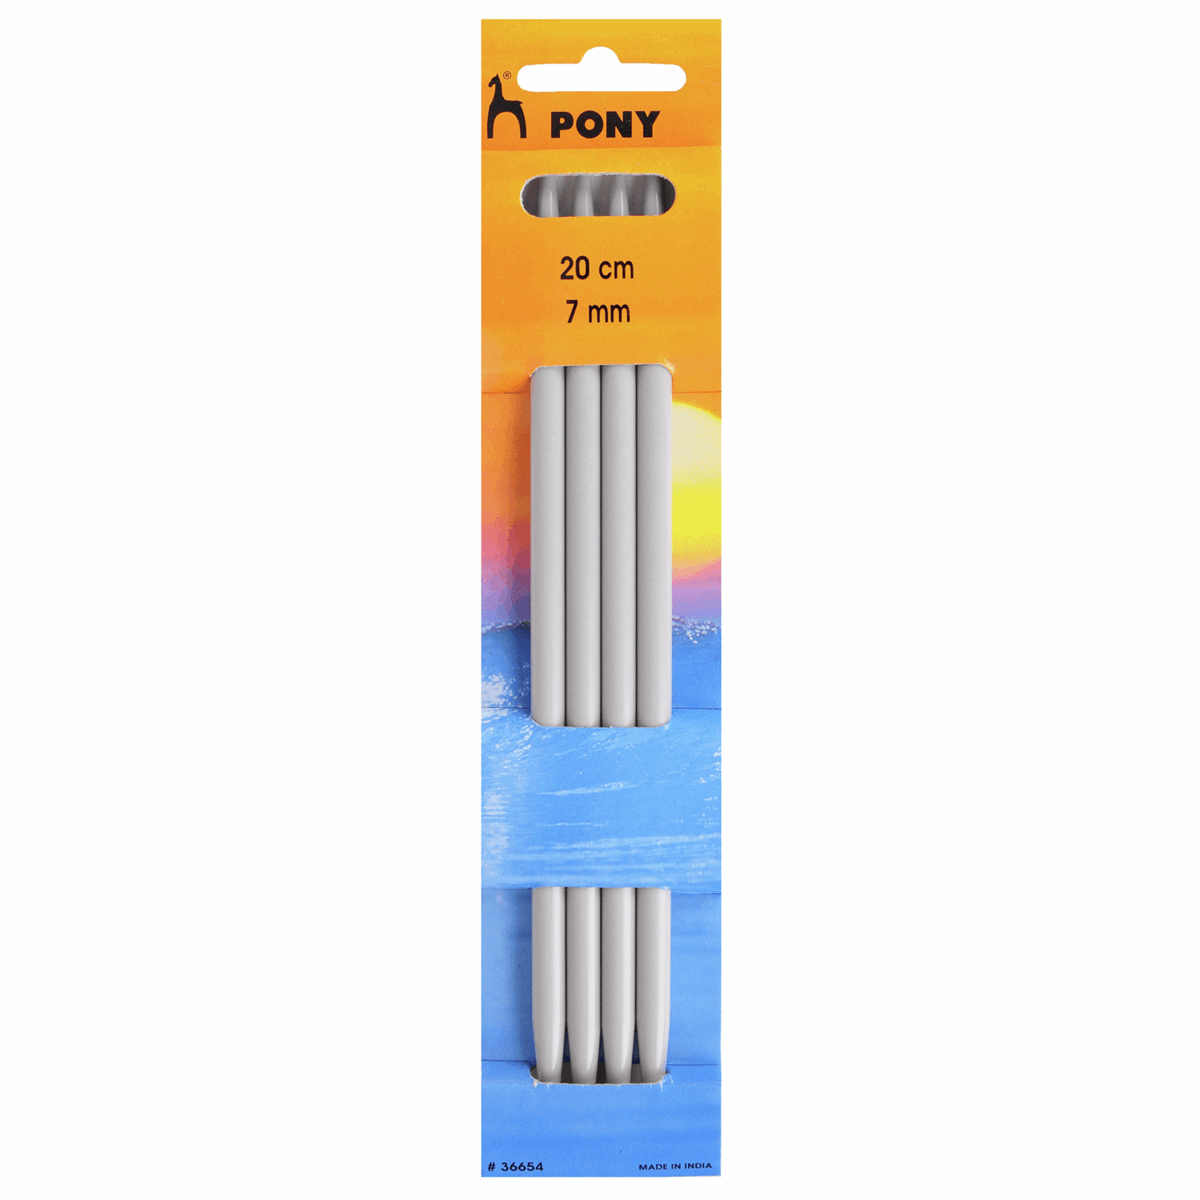 PONY Double-Ended Knitting Pins - 20cm x 7mm (Set of 4)